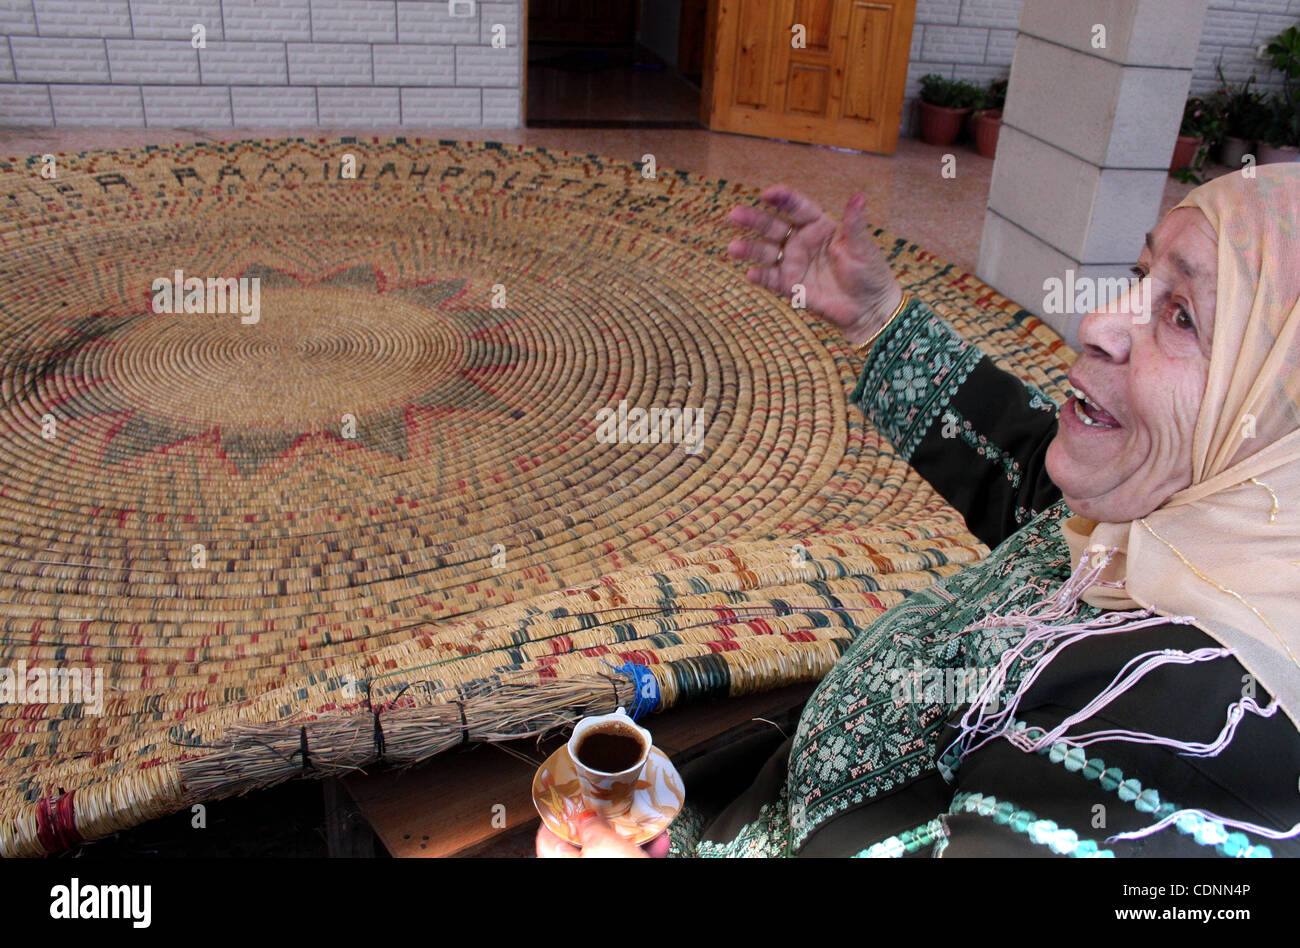 Jun 20, 2011 - Ramallah, West Bank - An elderly Palestinian woman, RASELAH ABED AL-HAFEZ, 70, prepares what she calls the biggest hay traditional dish, hoping to make it into the Guinness Book of Records. (Credit Image: © Issam Rimawi/apaimages/ZUMAPRESS.com) Stock Photo